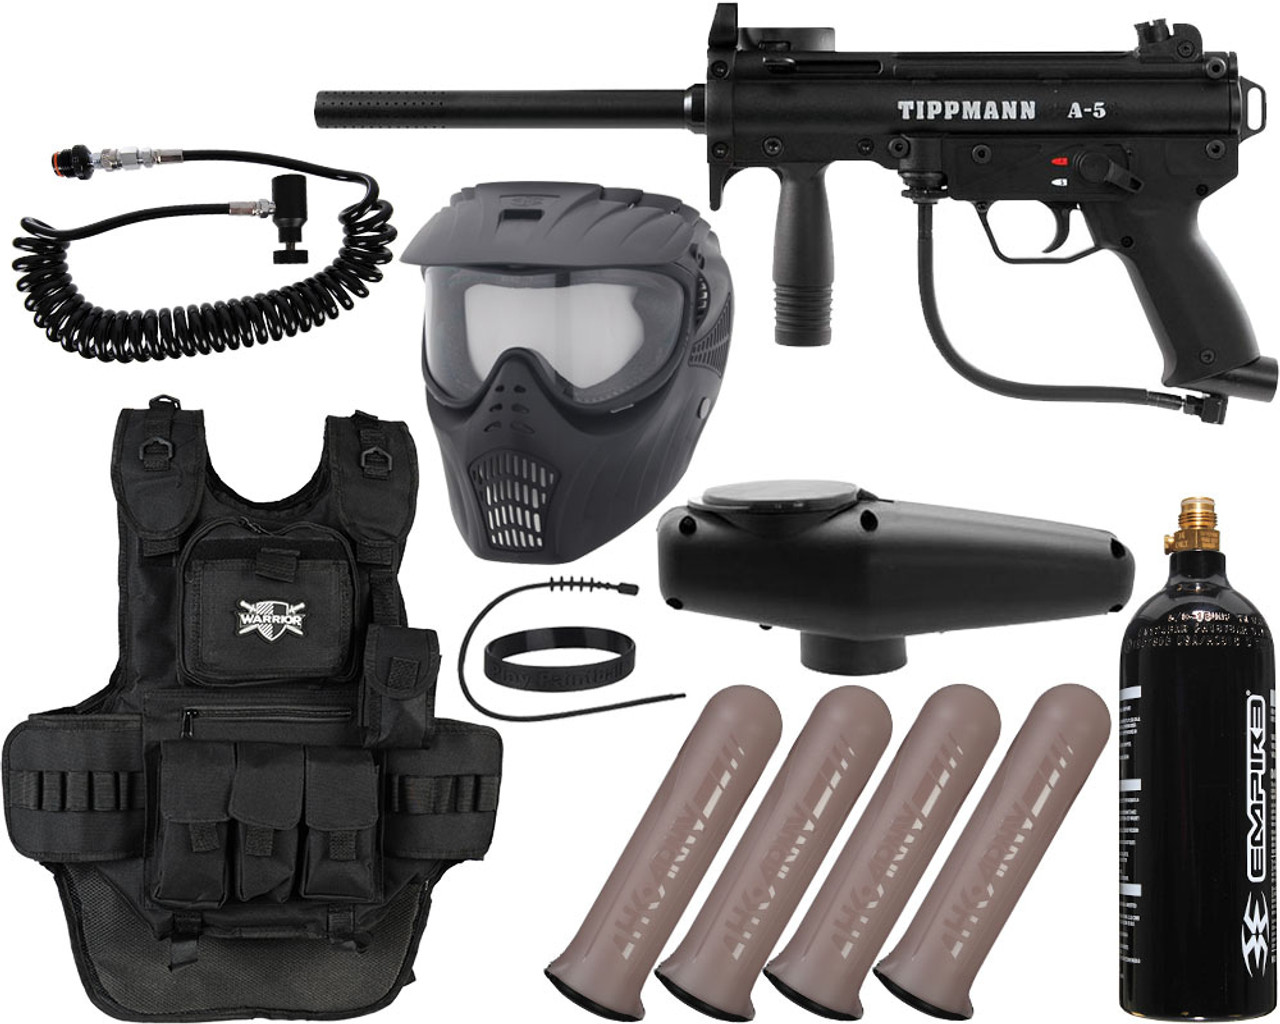 Tippmann A5 Paintball Marker Gun with the Cyclone Feed System